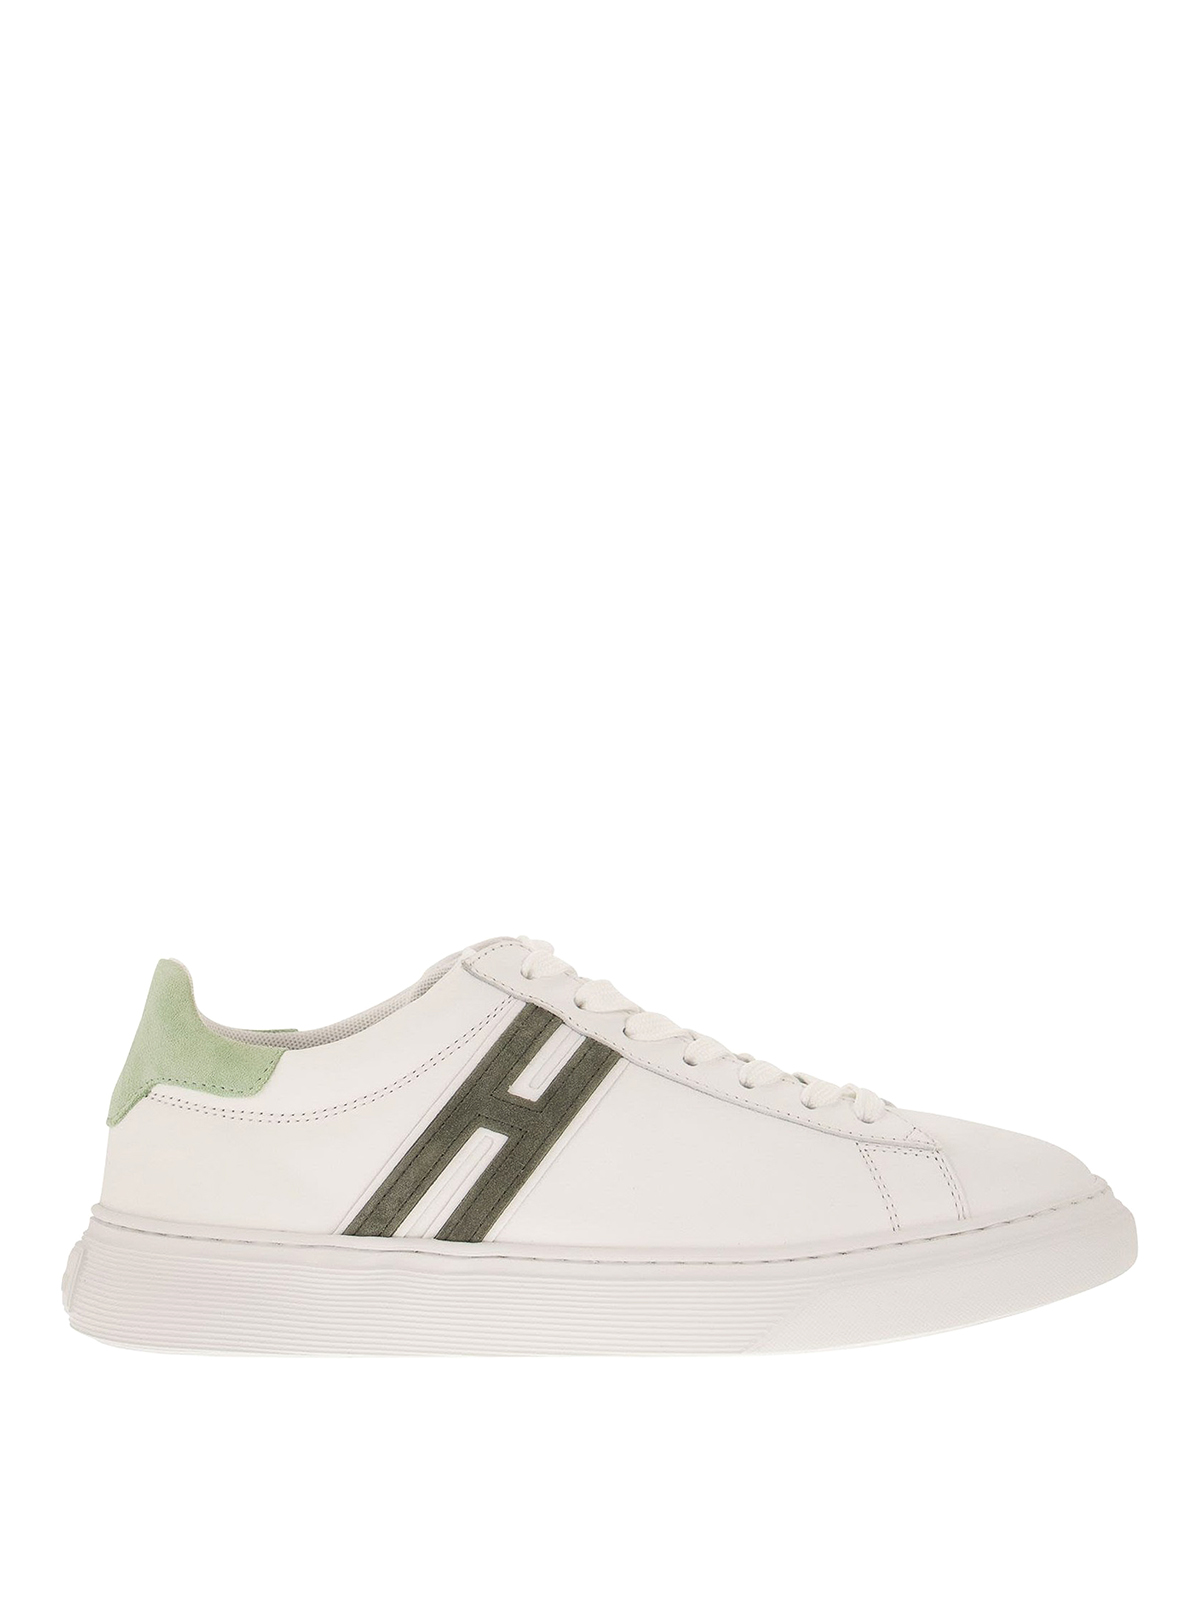 Hogan H 365 Sneakers In Leather And Suede Details In White